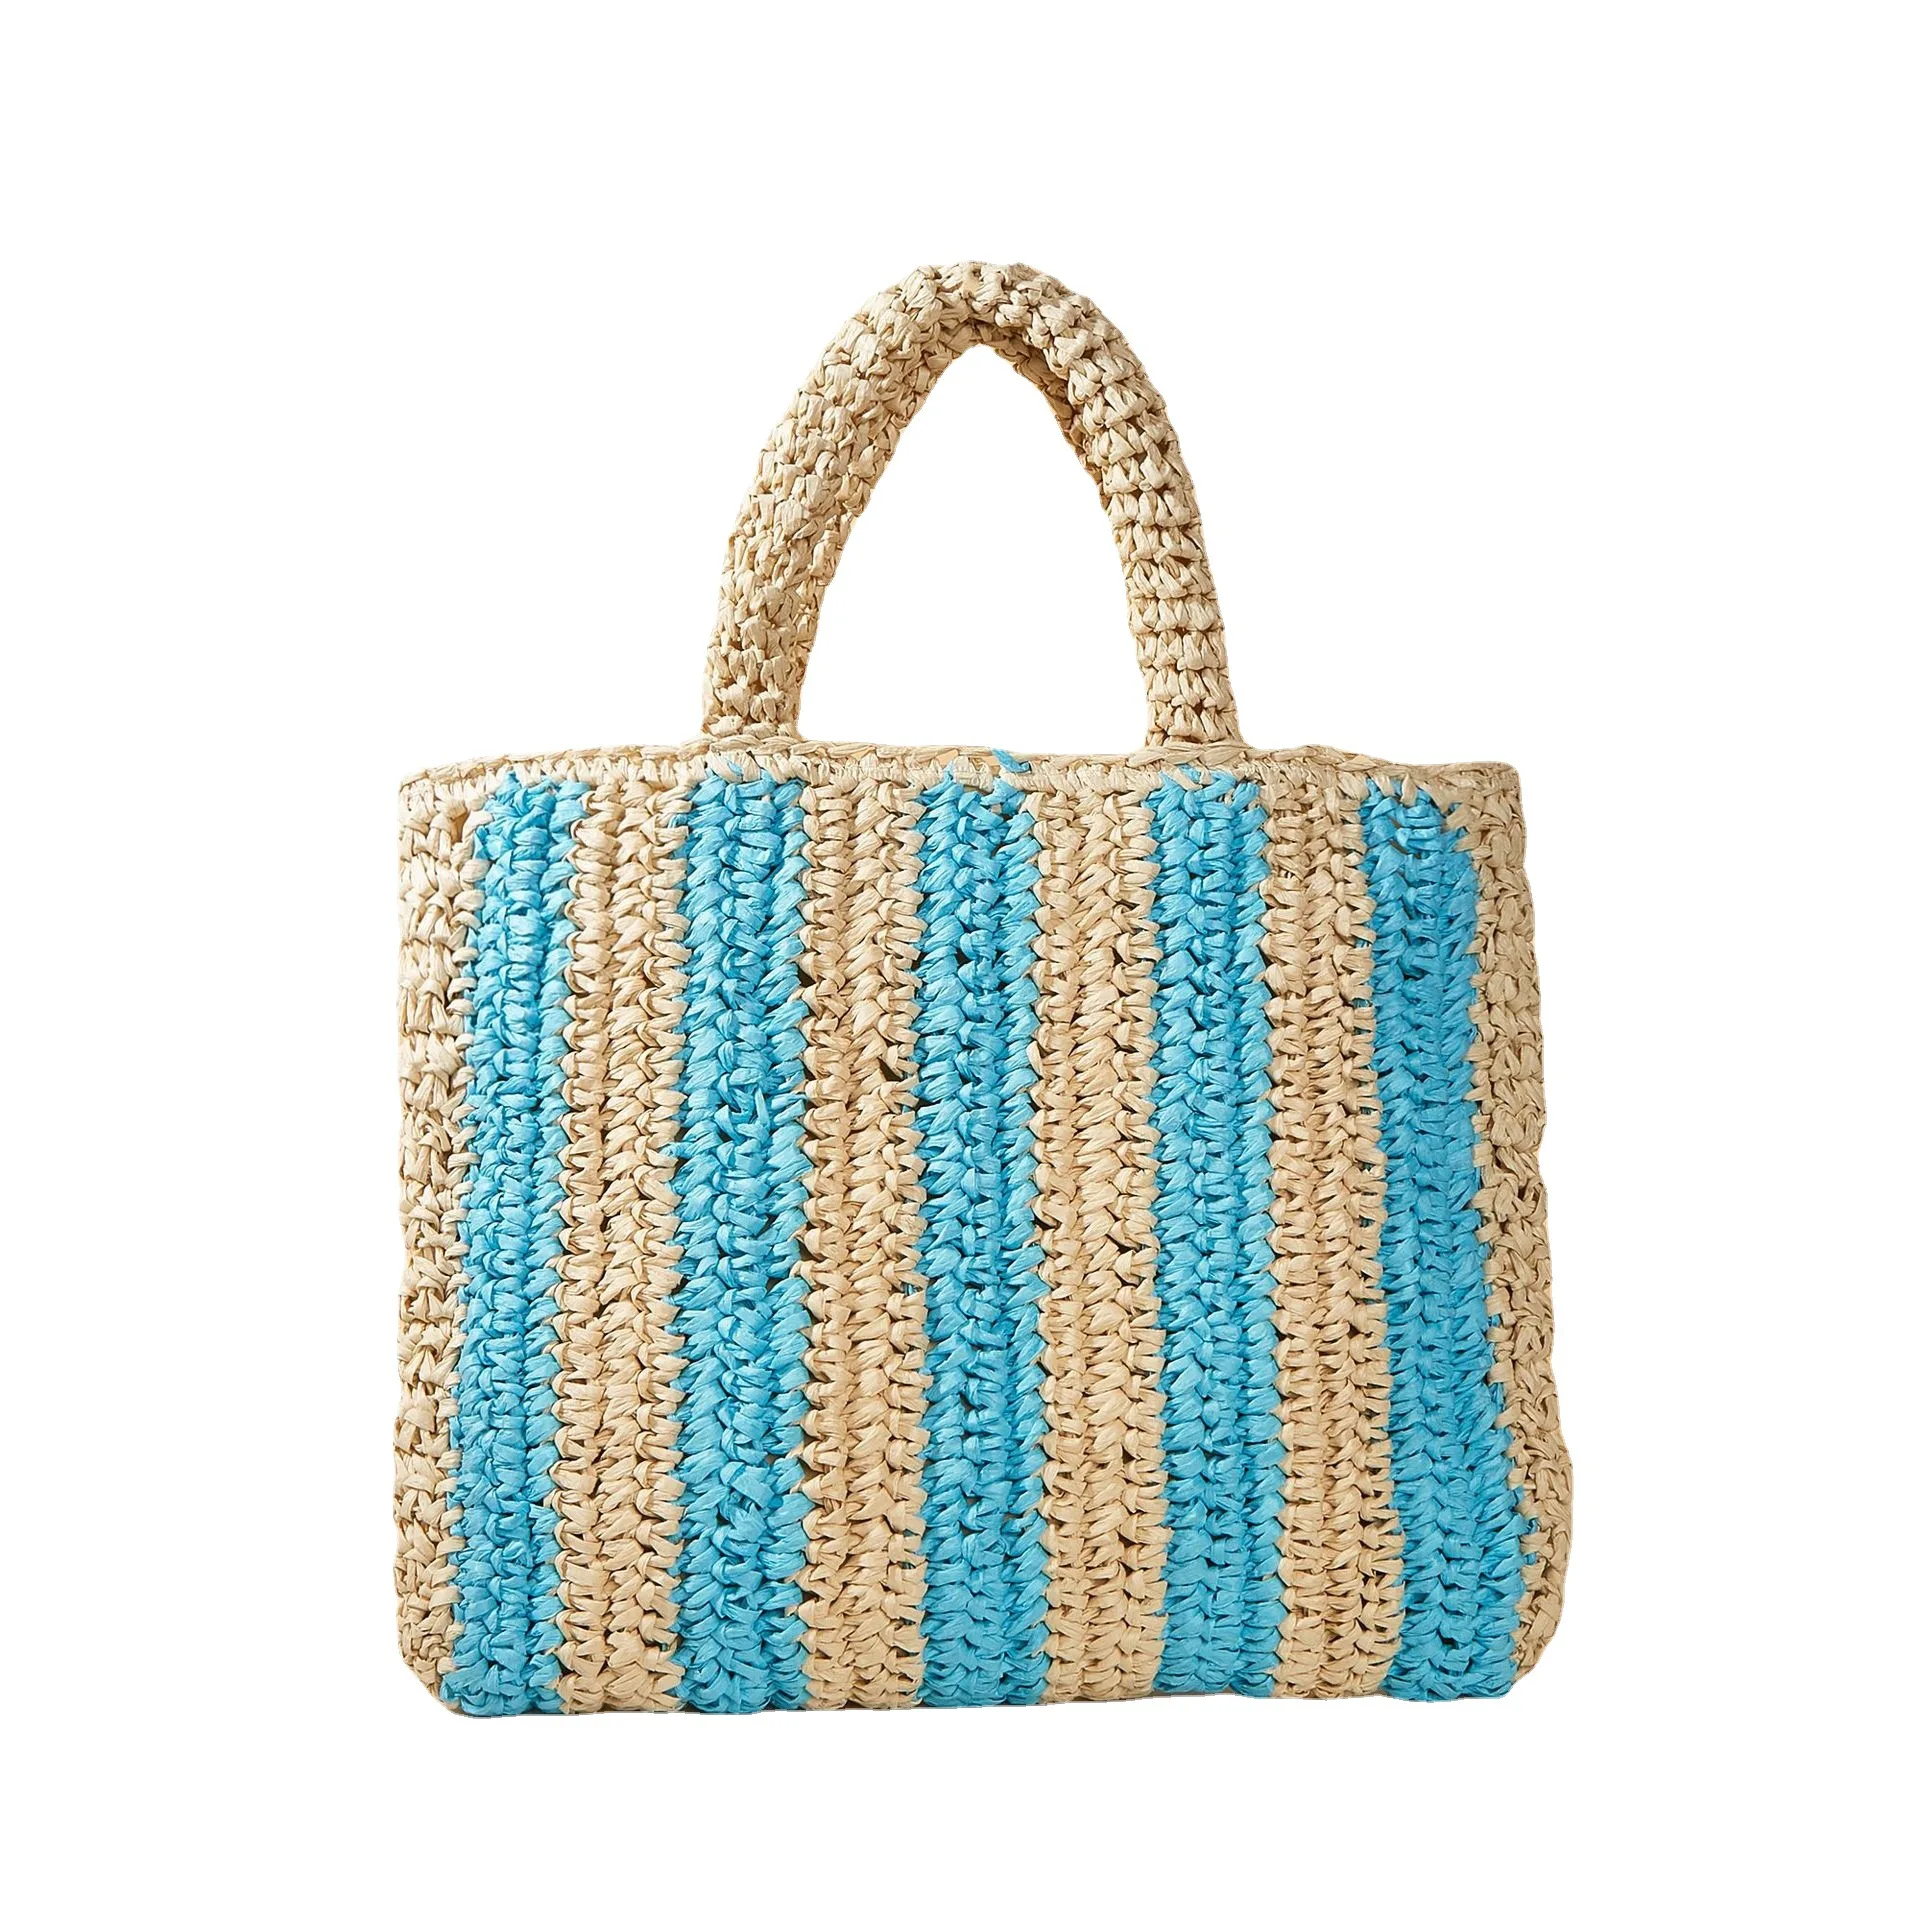 22 Straw Bags To Refresh Your Spring  Summer Looks  ALLINSTYLE  Your  source fashion news  styling tips